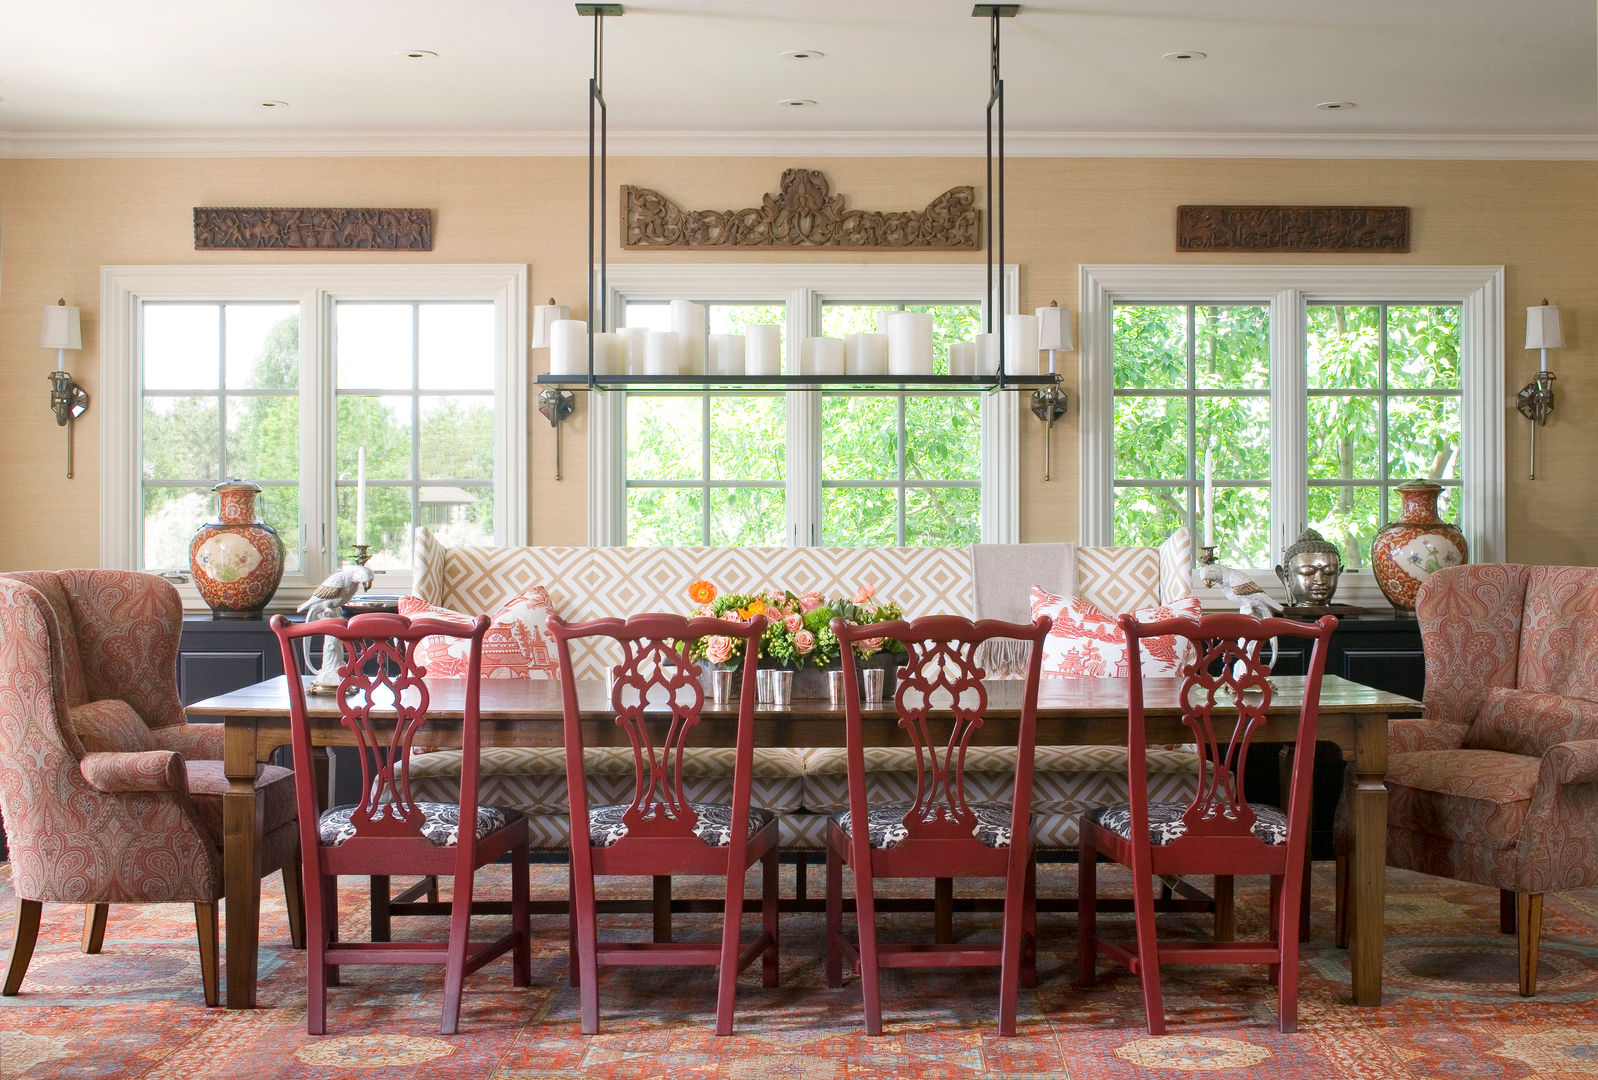 Home of the Year, Andrea Schumacher Interiors Andrea Schumacher Interiors Їдальня